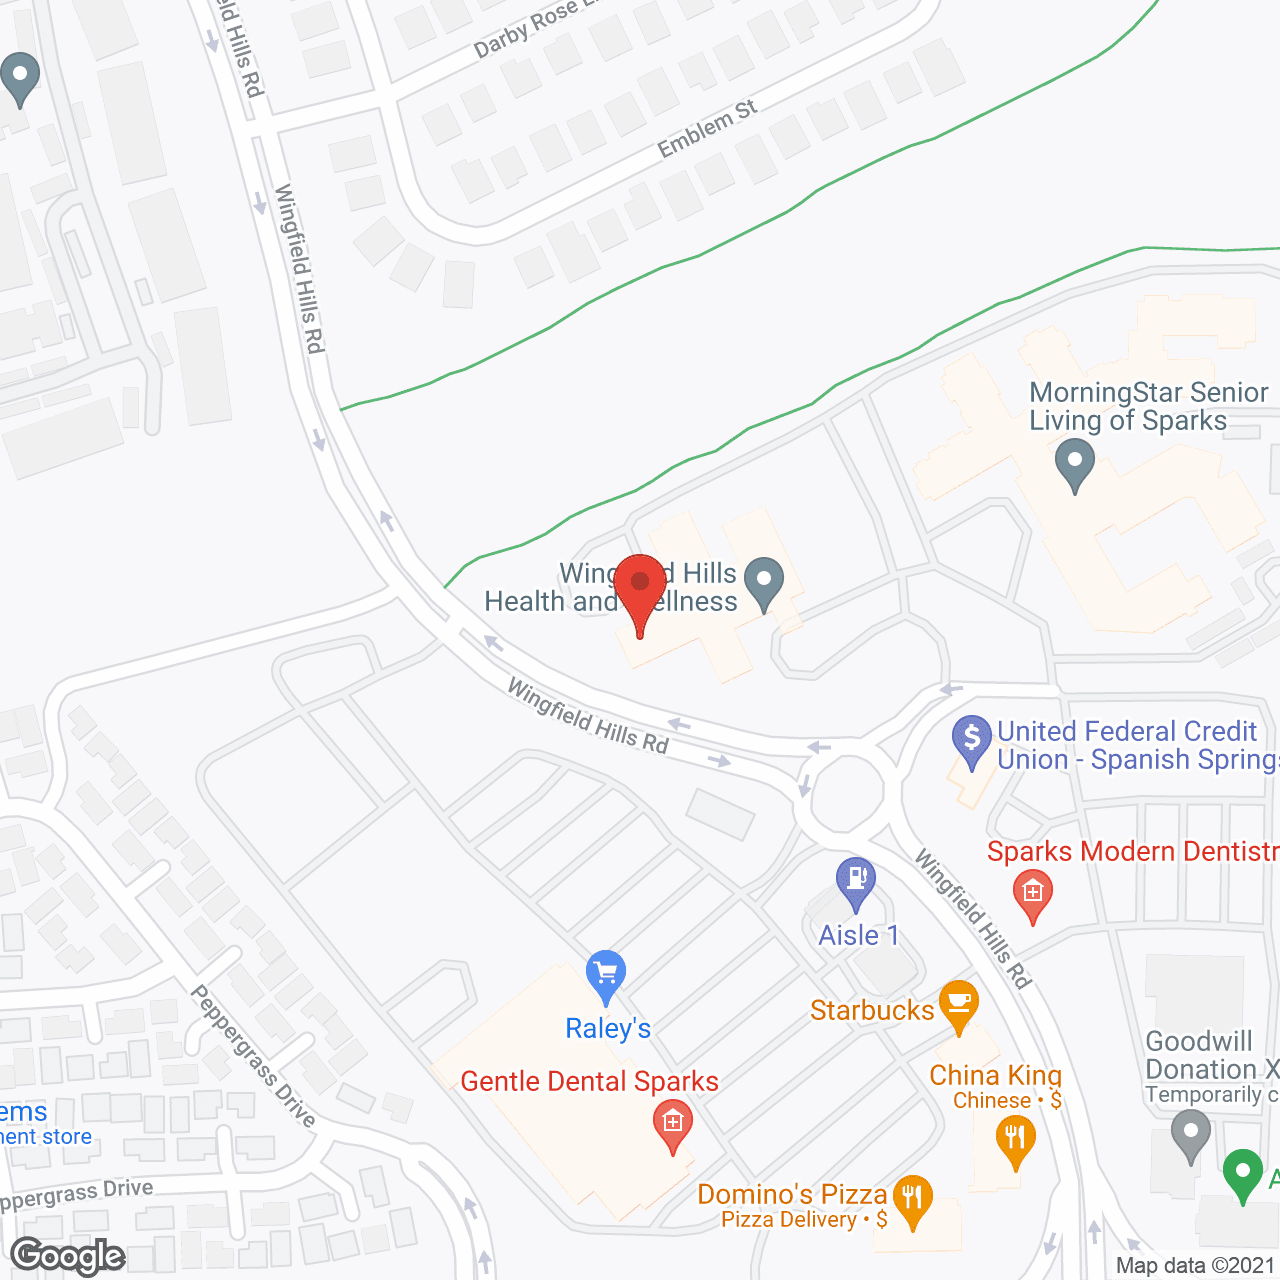 Wingfield Hills Health and Wellness in google map